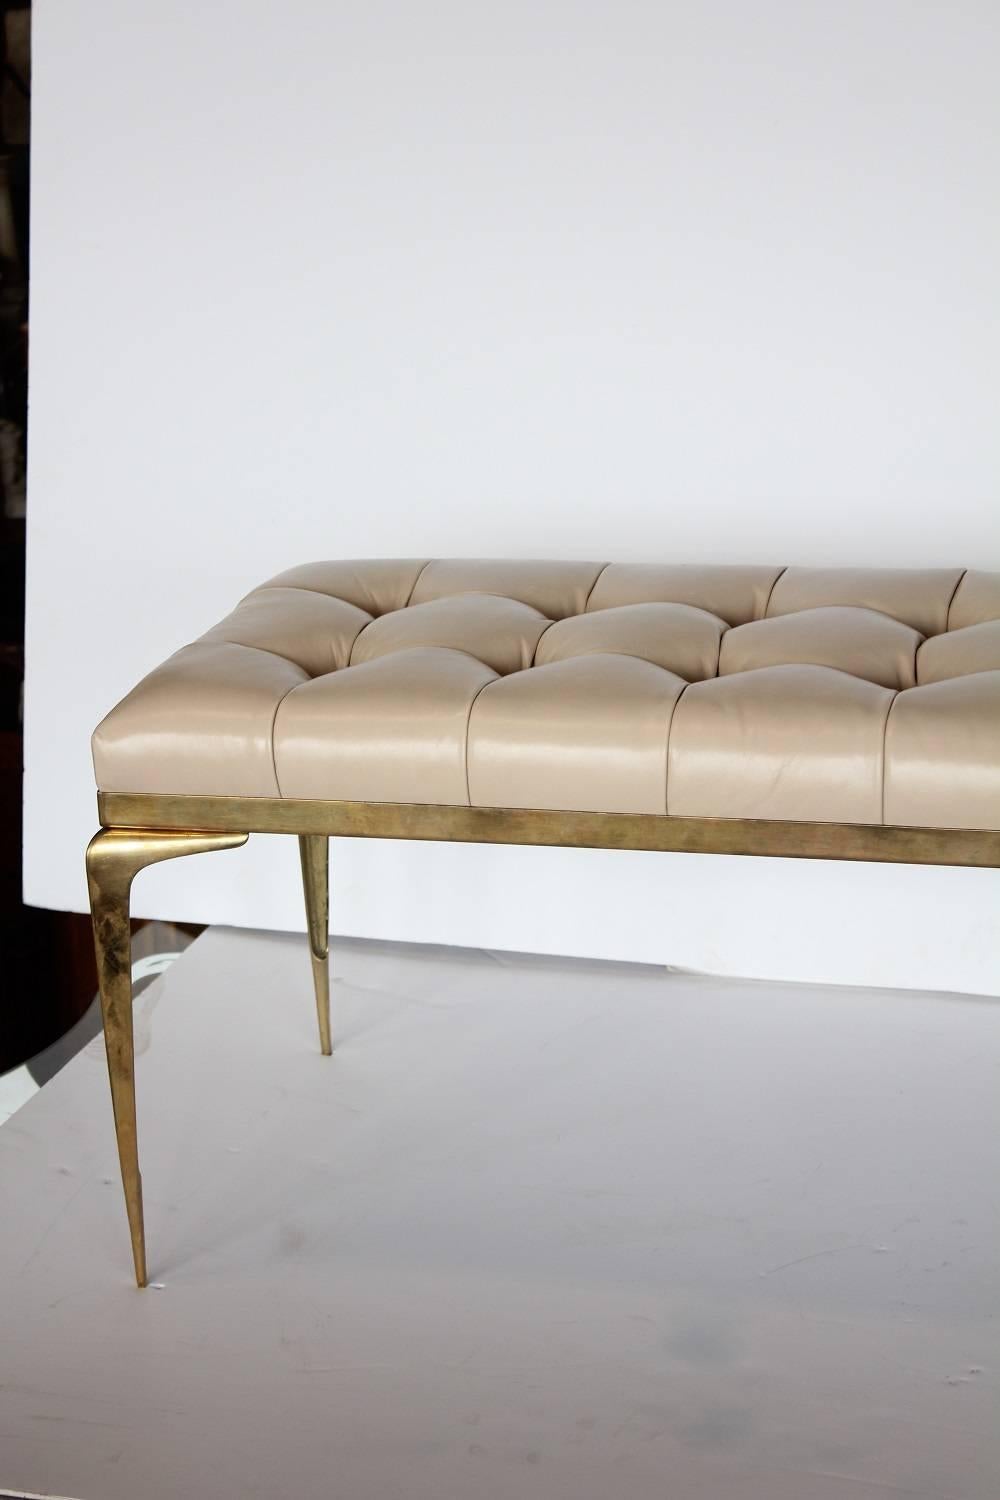 Mid-20th Century Midcentury Italian Gio Ponti Style Tufted Leather and Brass Bench